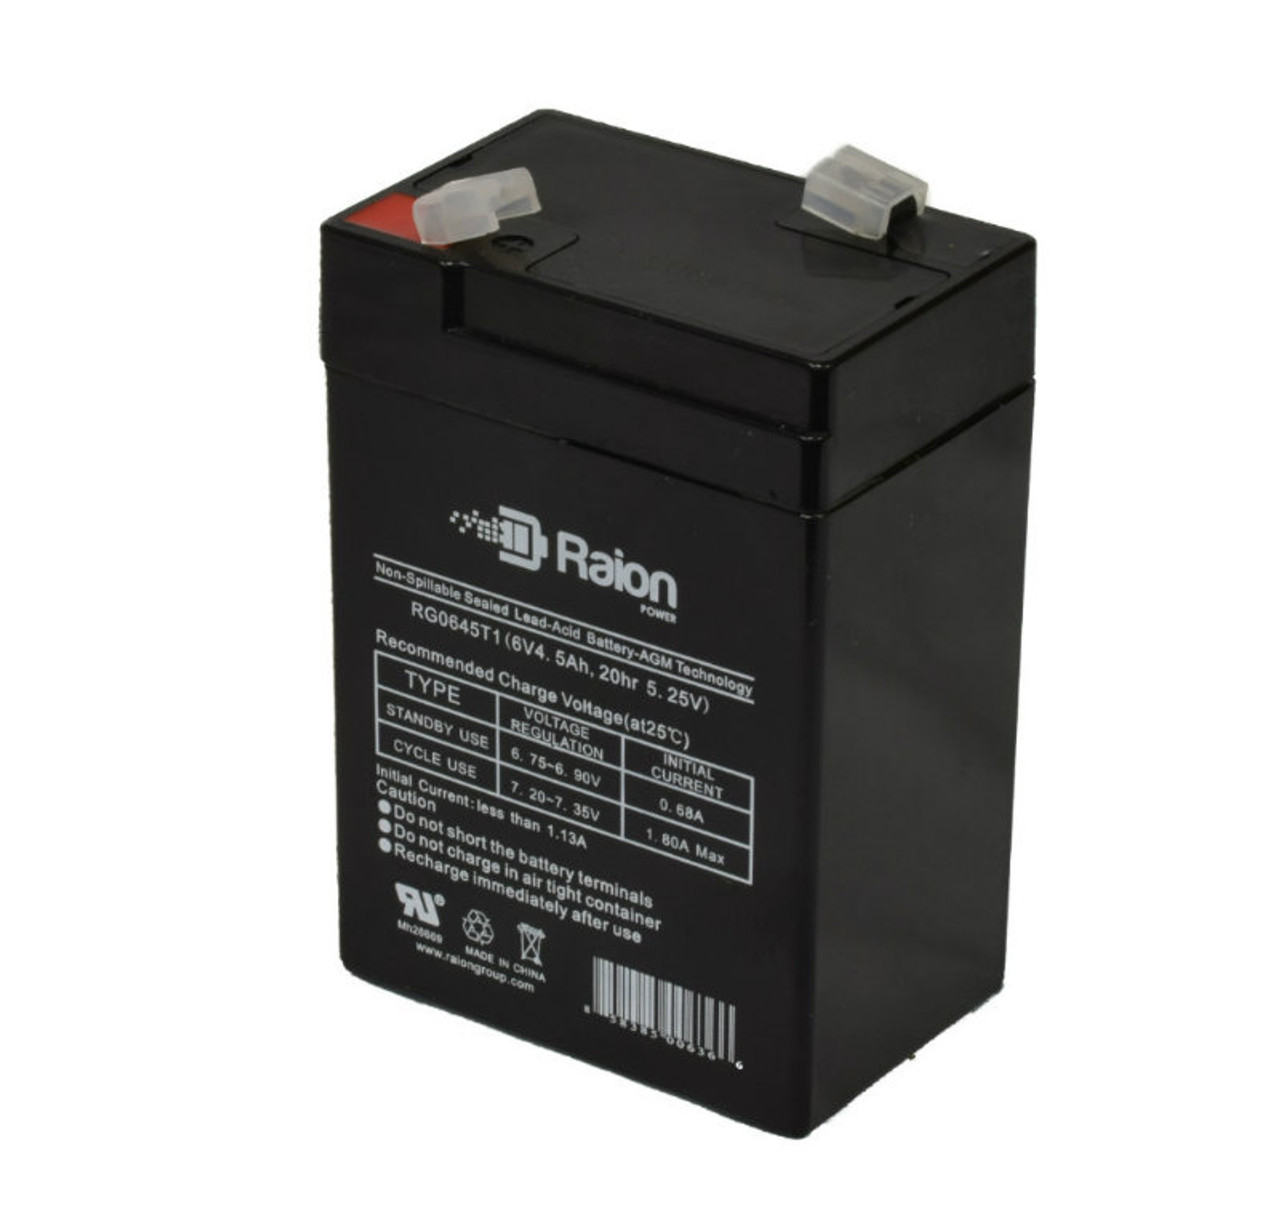 Raion Power RG0645T1 6V 4.5Ah Replacement Battery Cartridge for Kaiying KS4-6A